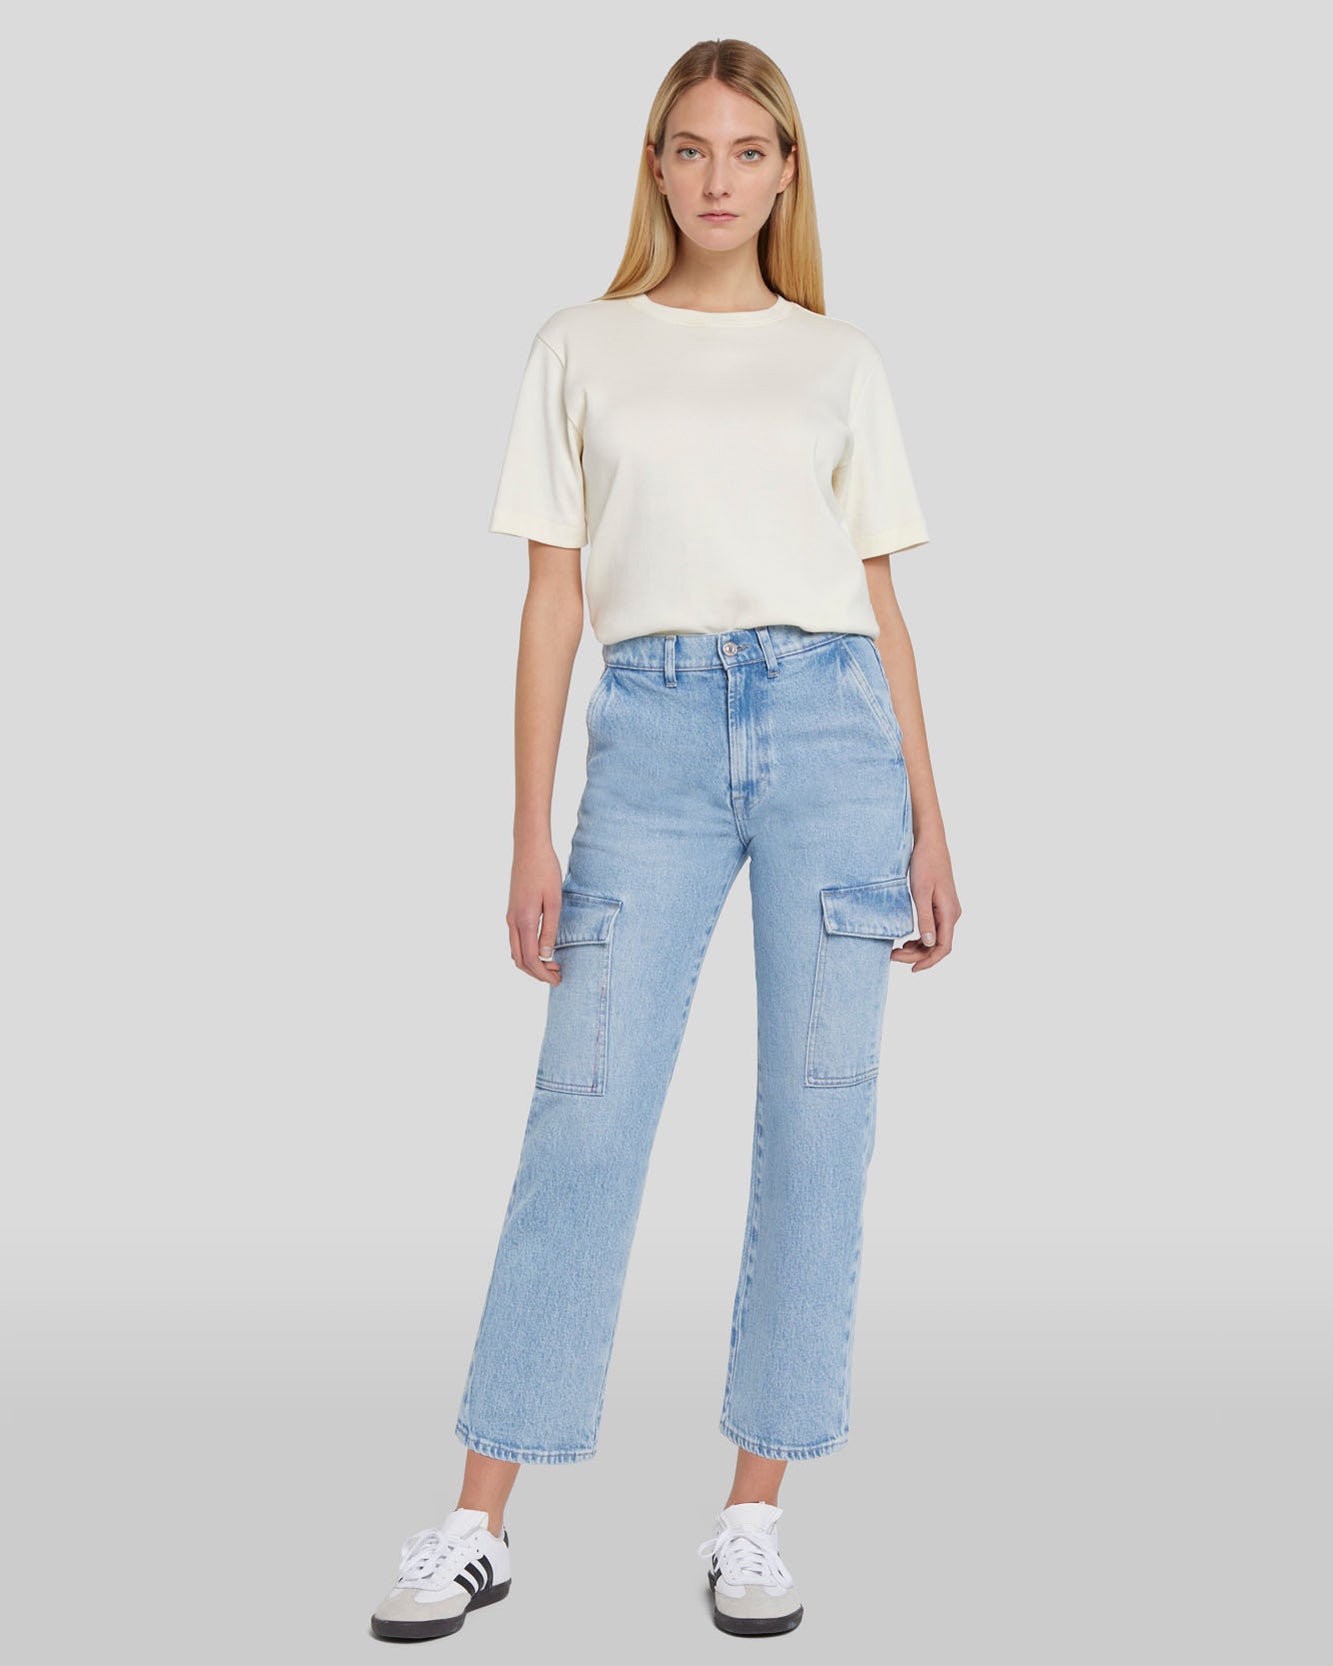 Logan Cropped Cargo Jean in Airwave | 7 For All Mankind